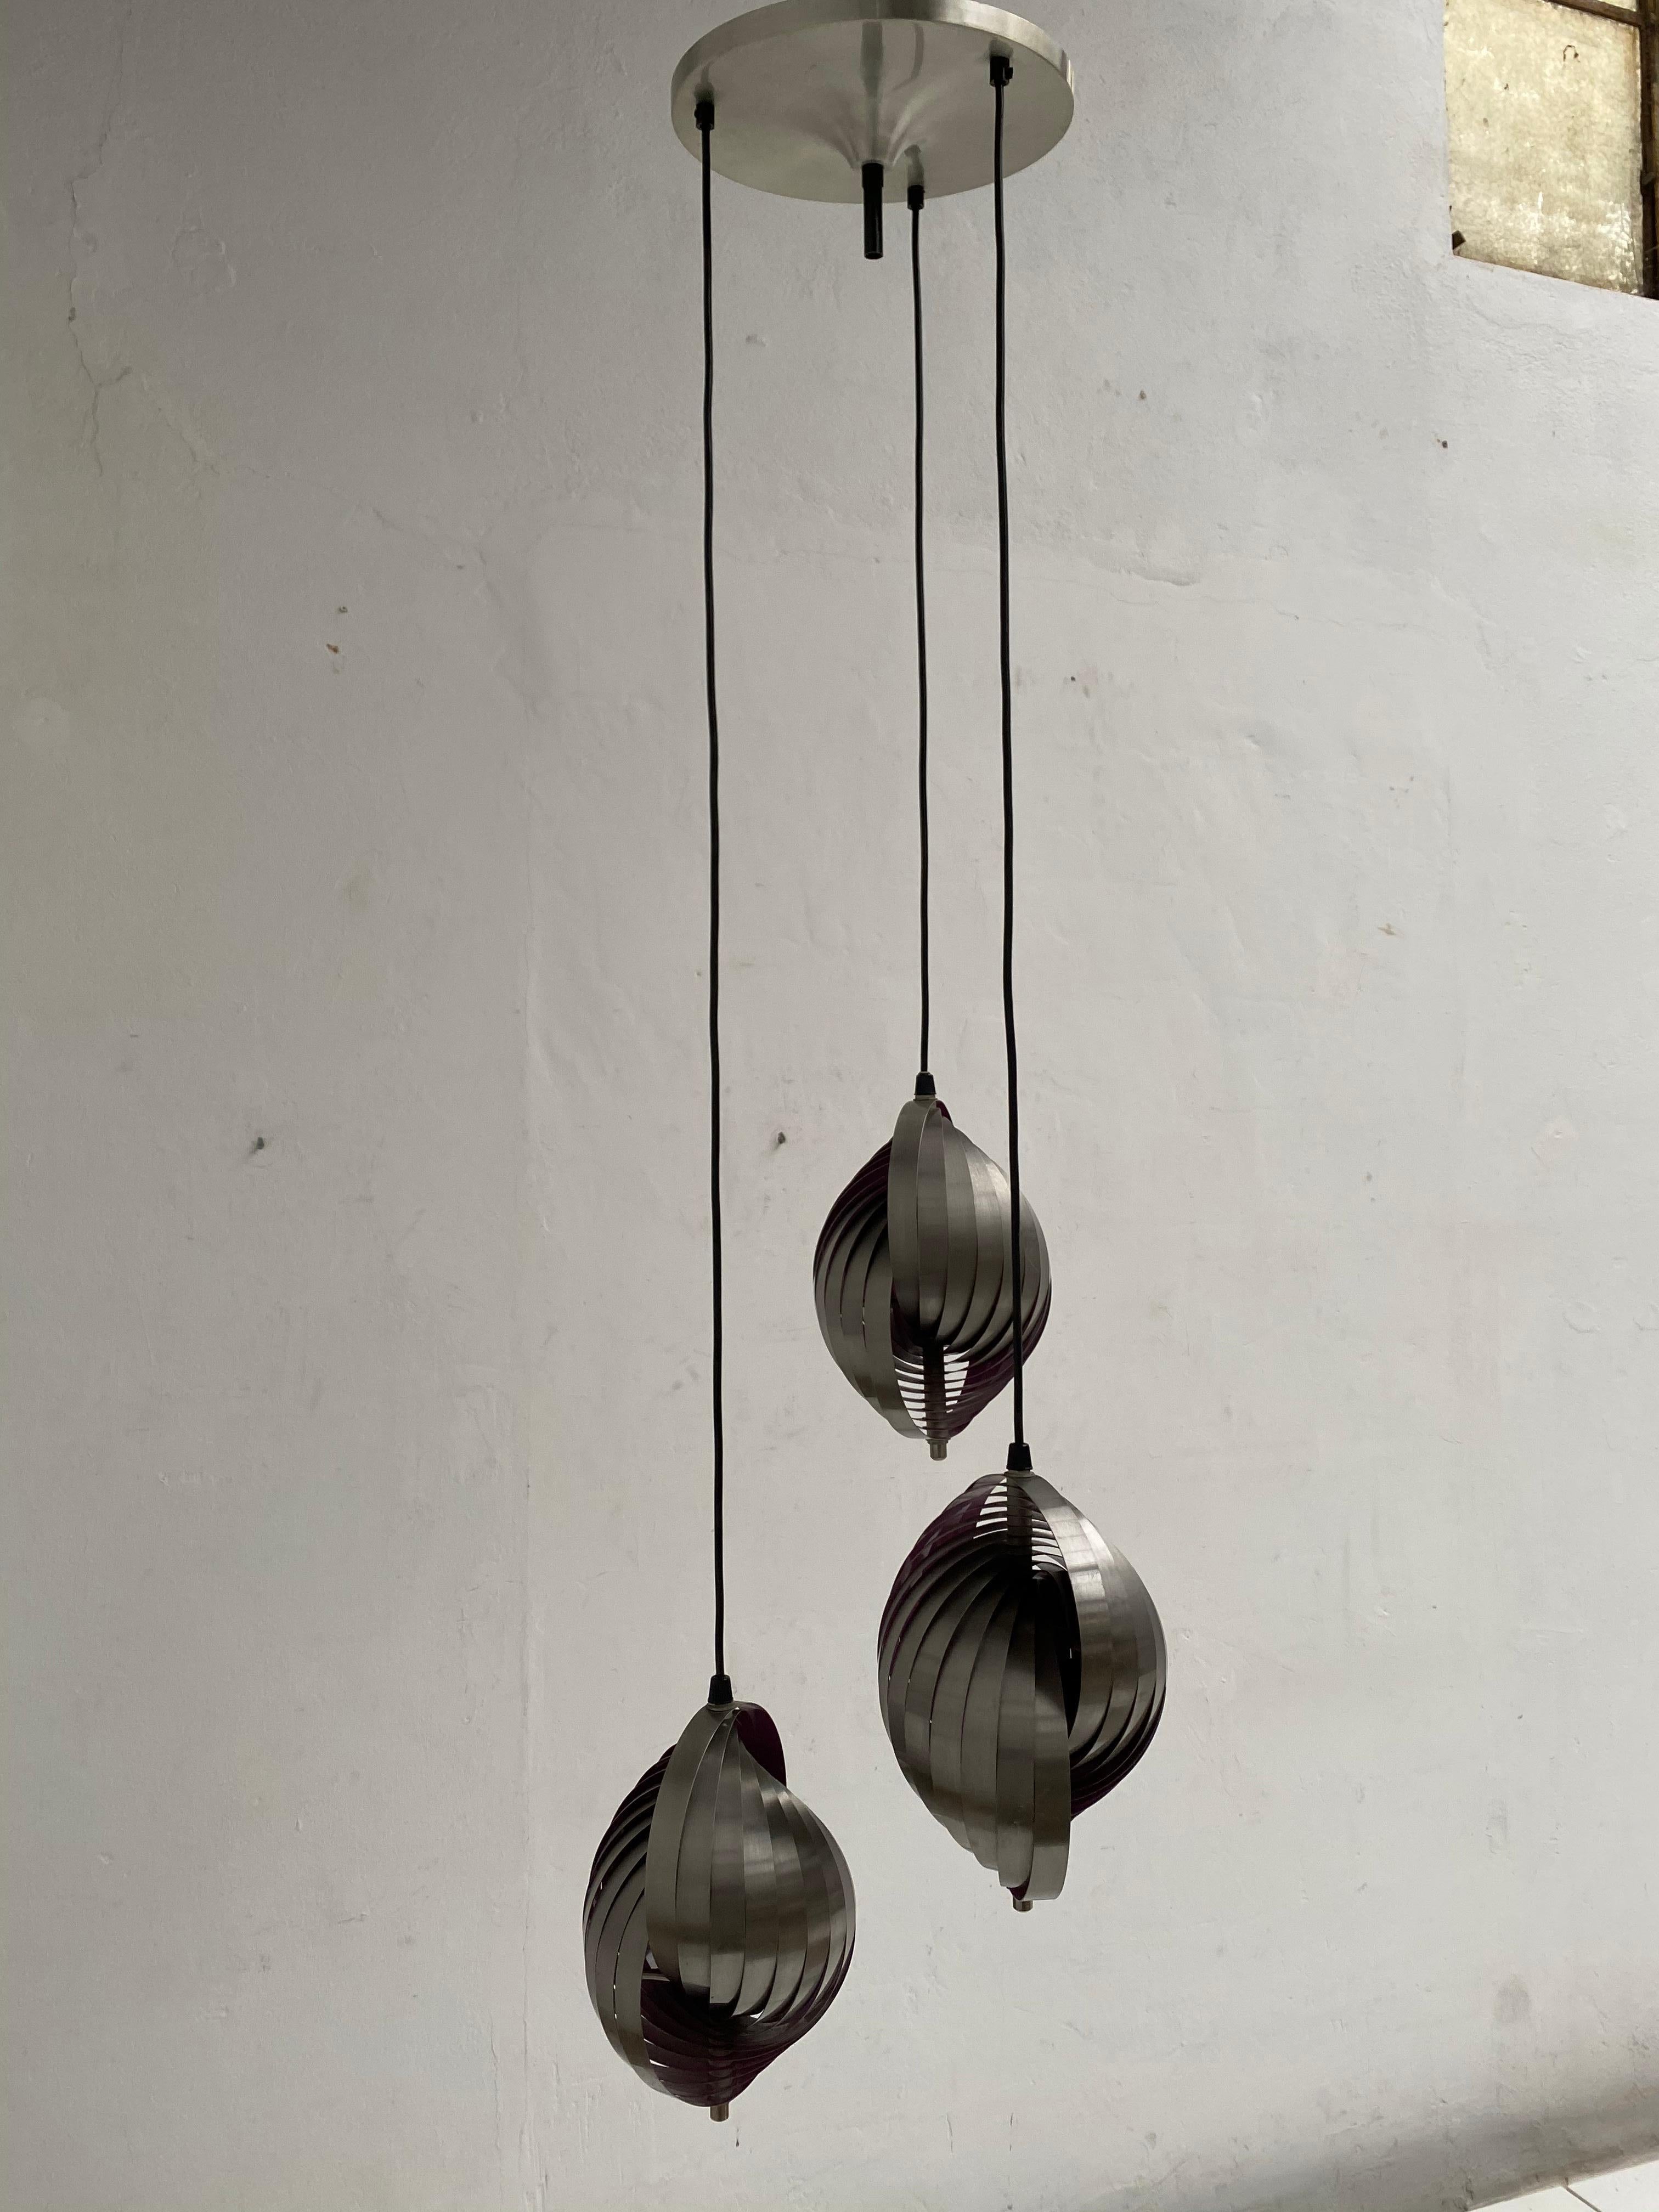 Twirling Brushed Steel Pendant by Henri Mathieu circa 1970 for Lyfa, Denmark For Sale 4